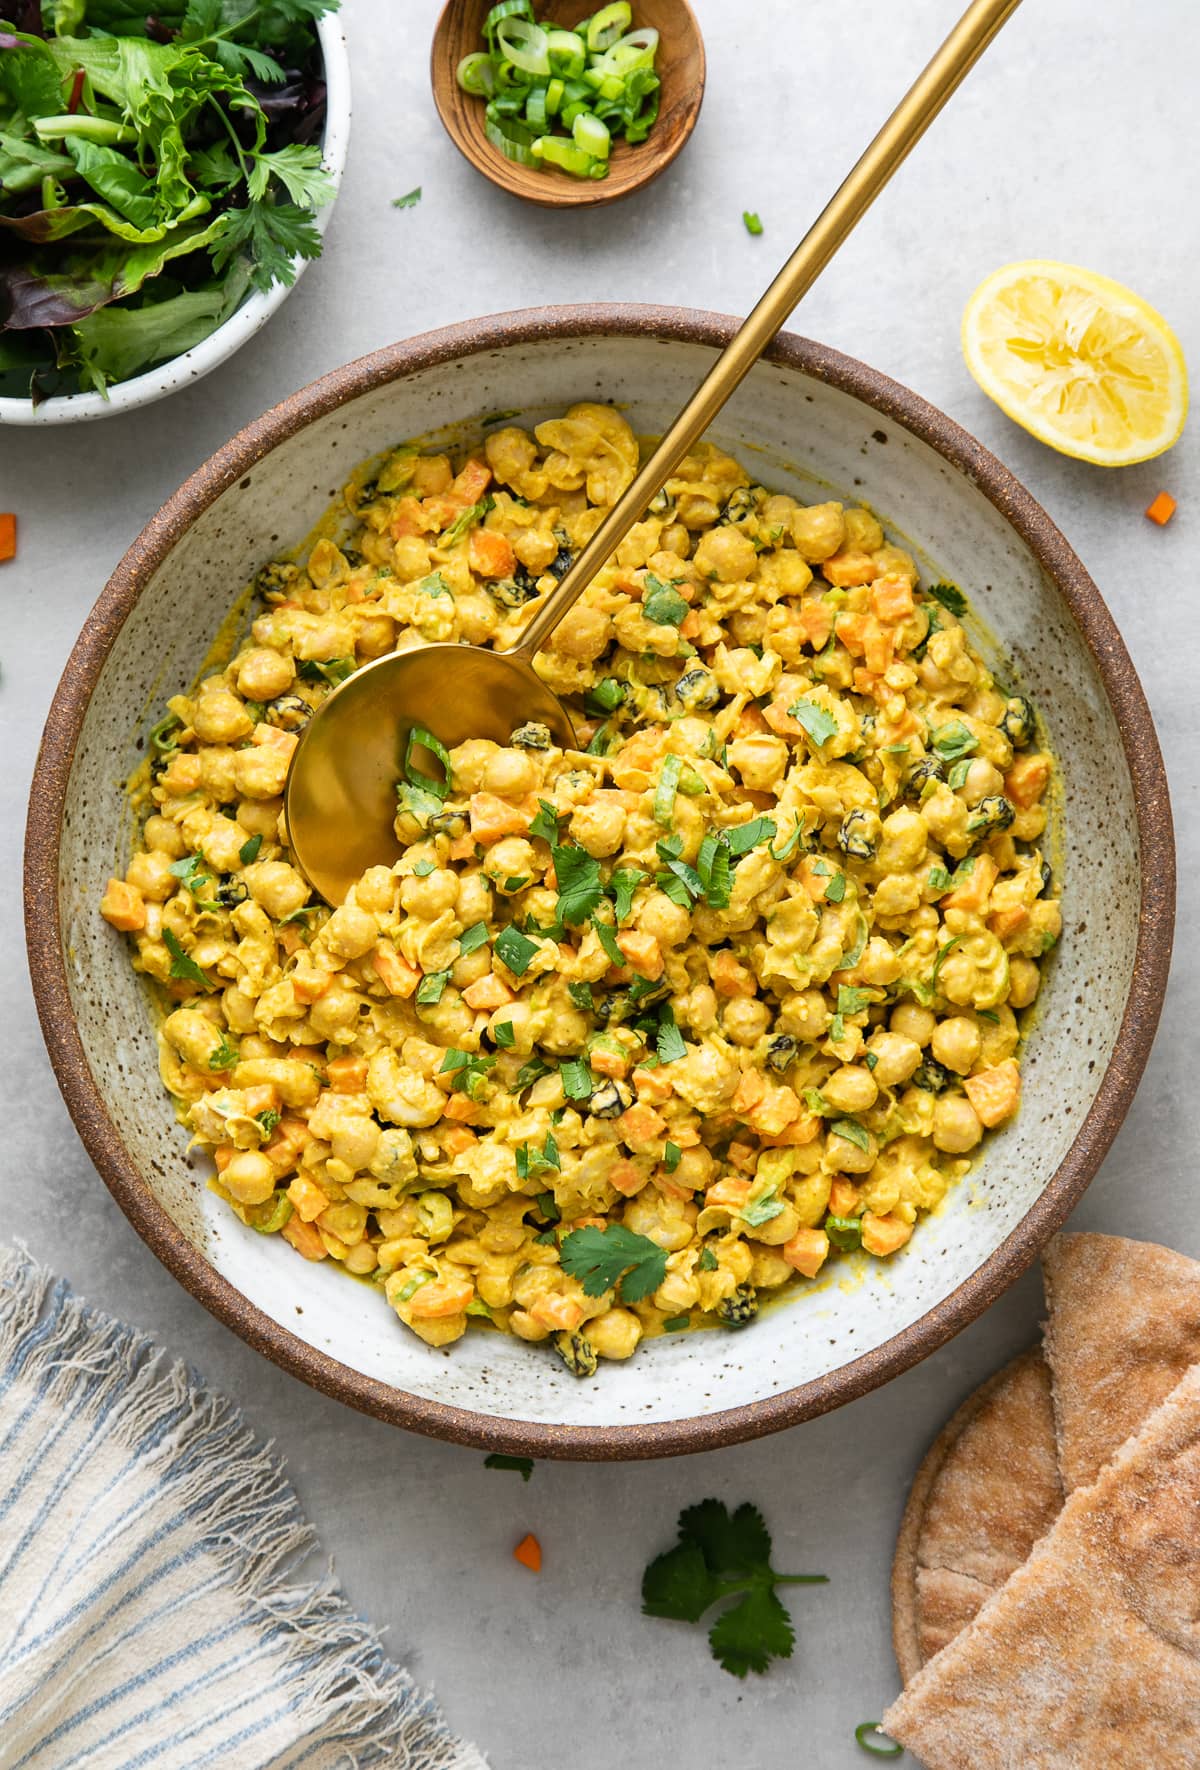 top down view of bowl with freshly made healthy curried chickpea salad with serving spoon with items surrounding.